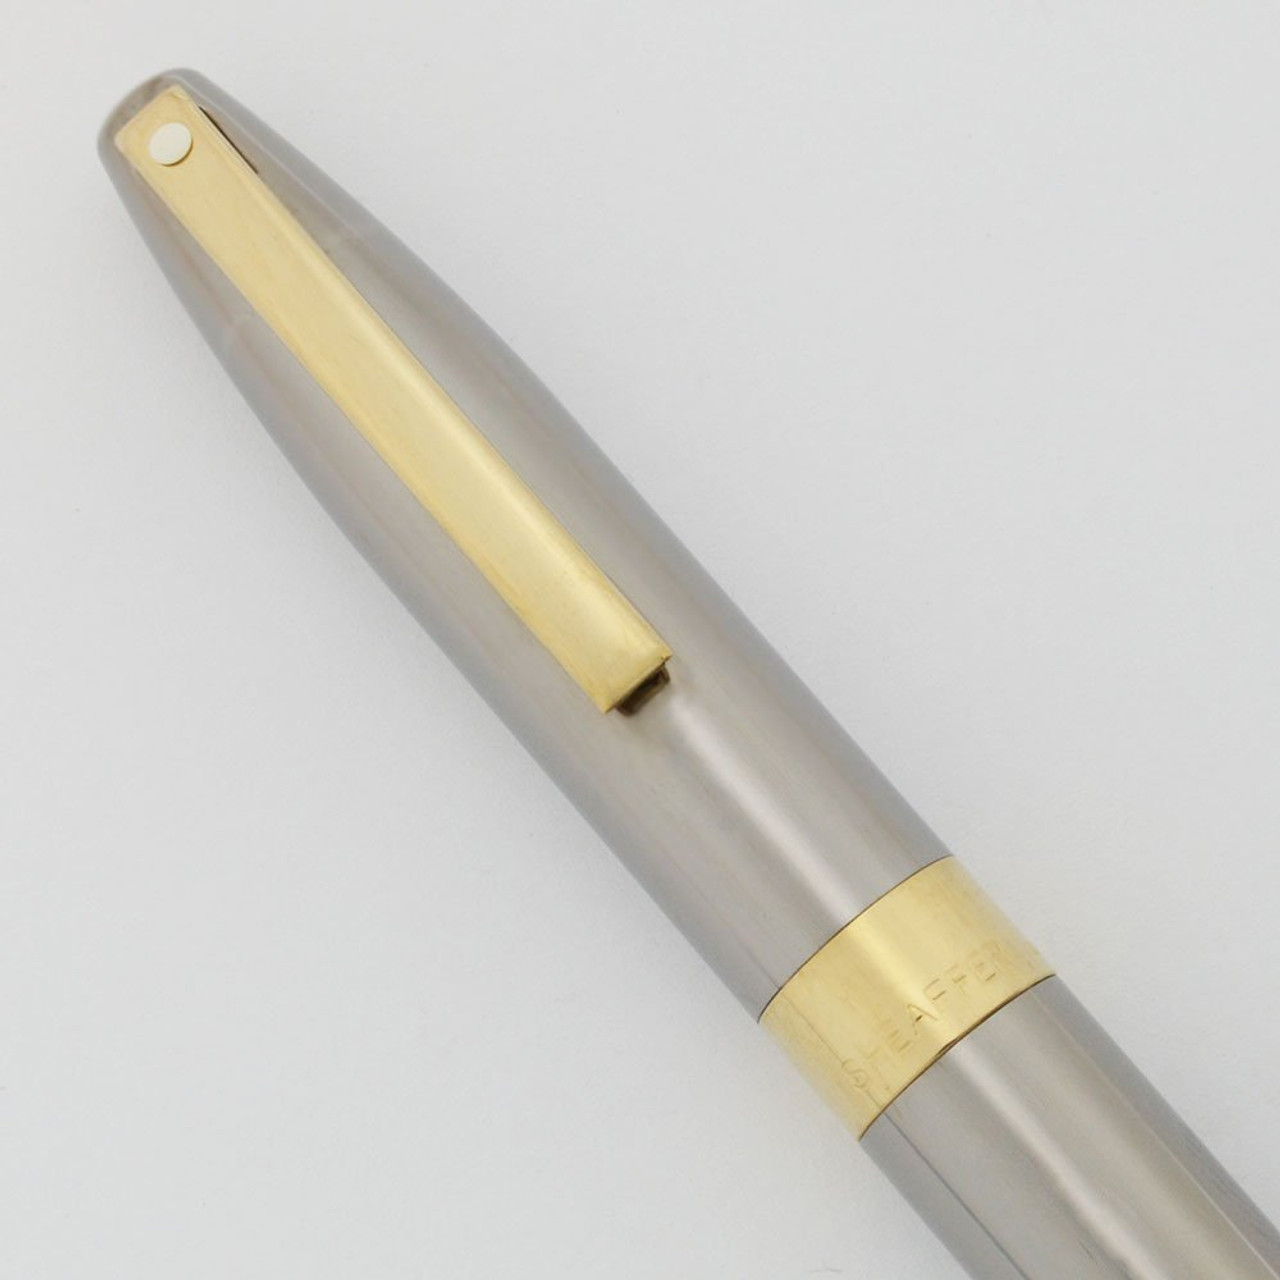 Sheaffer Legacy Heritage Ballpoint - Gummetal with Gold Trim  (Excellent +, Works Well)